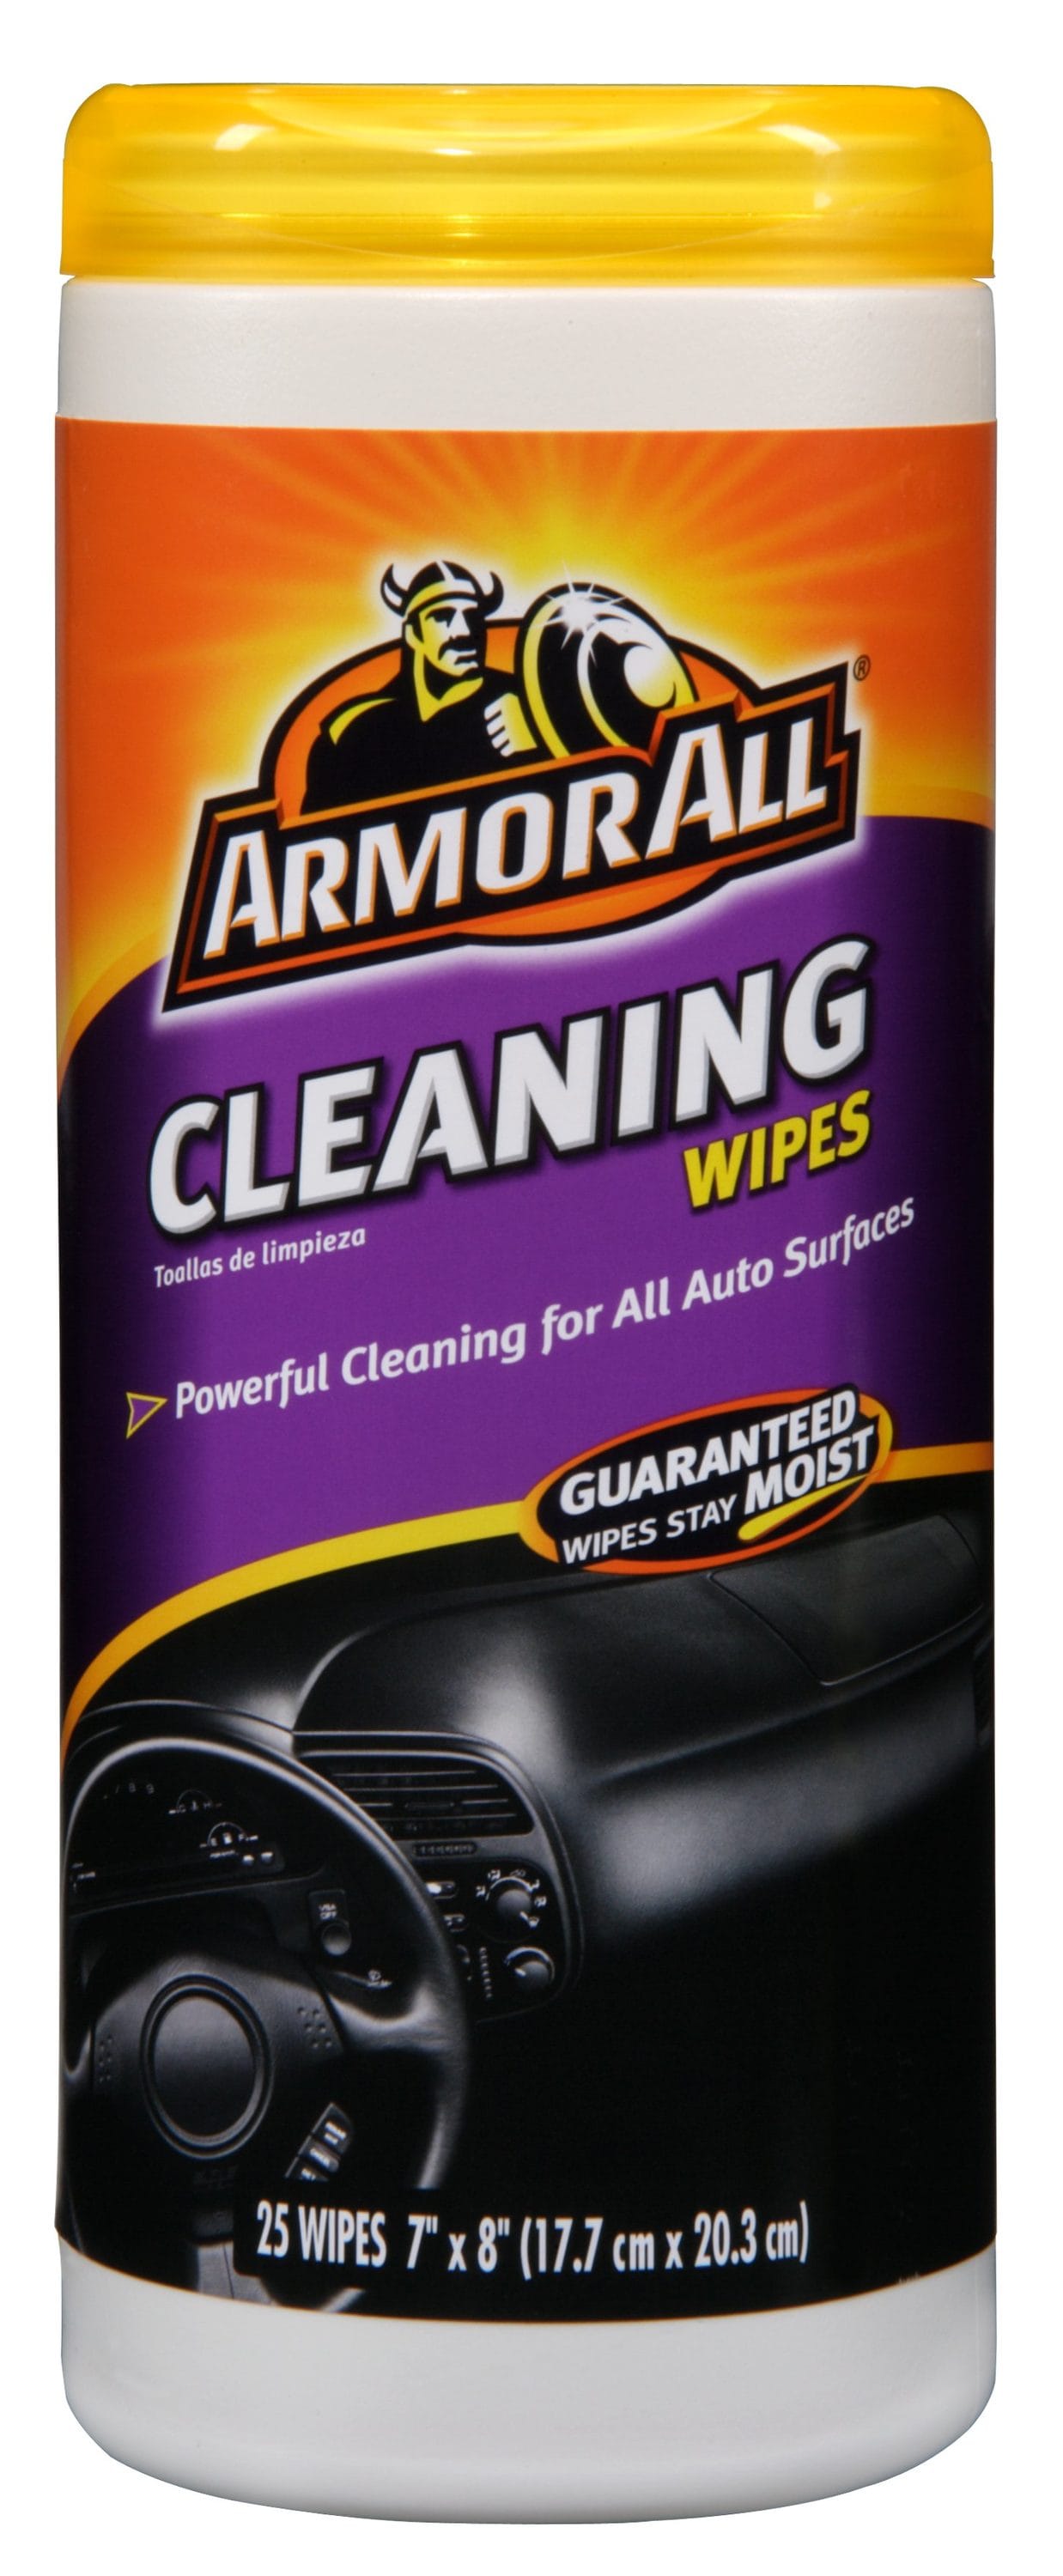  Armor All Disinfectant Wipes by Armor All